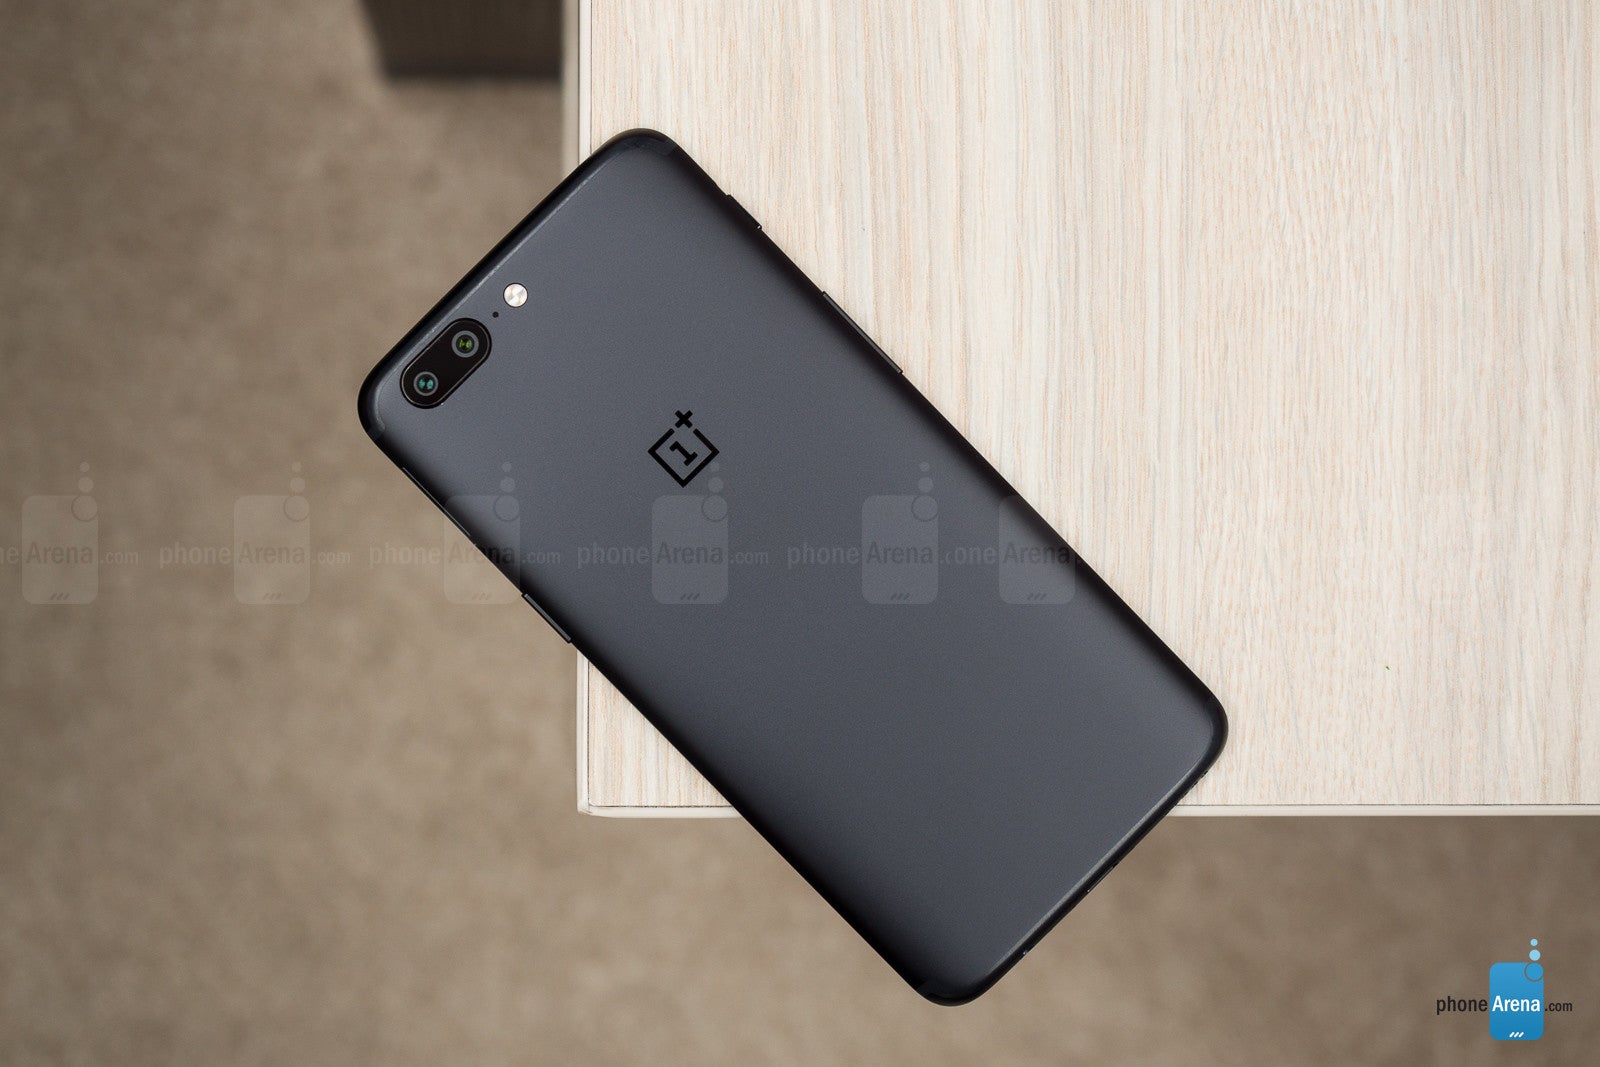 OnePlus launches a barrage of ads, lets us know why the OnePlus 5 is the best phone for students